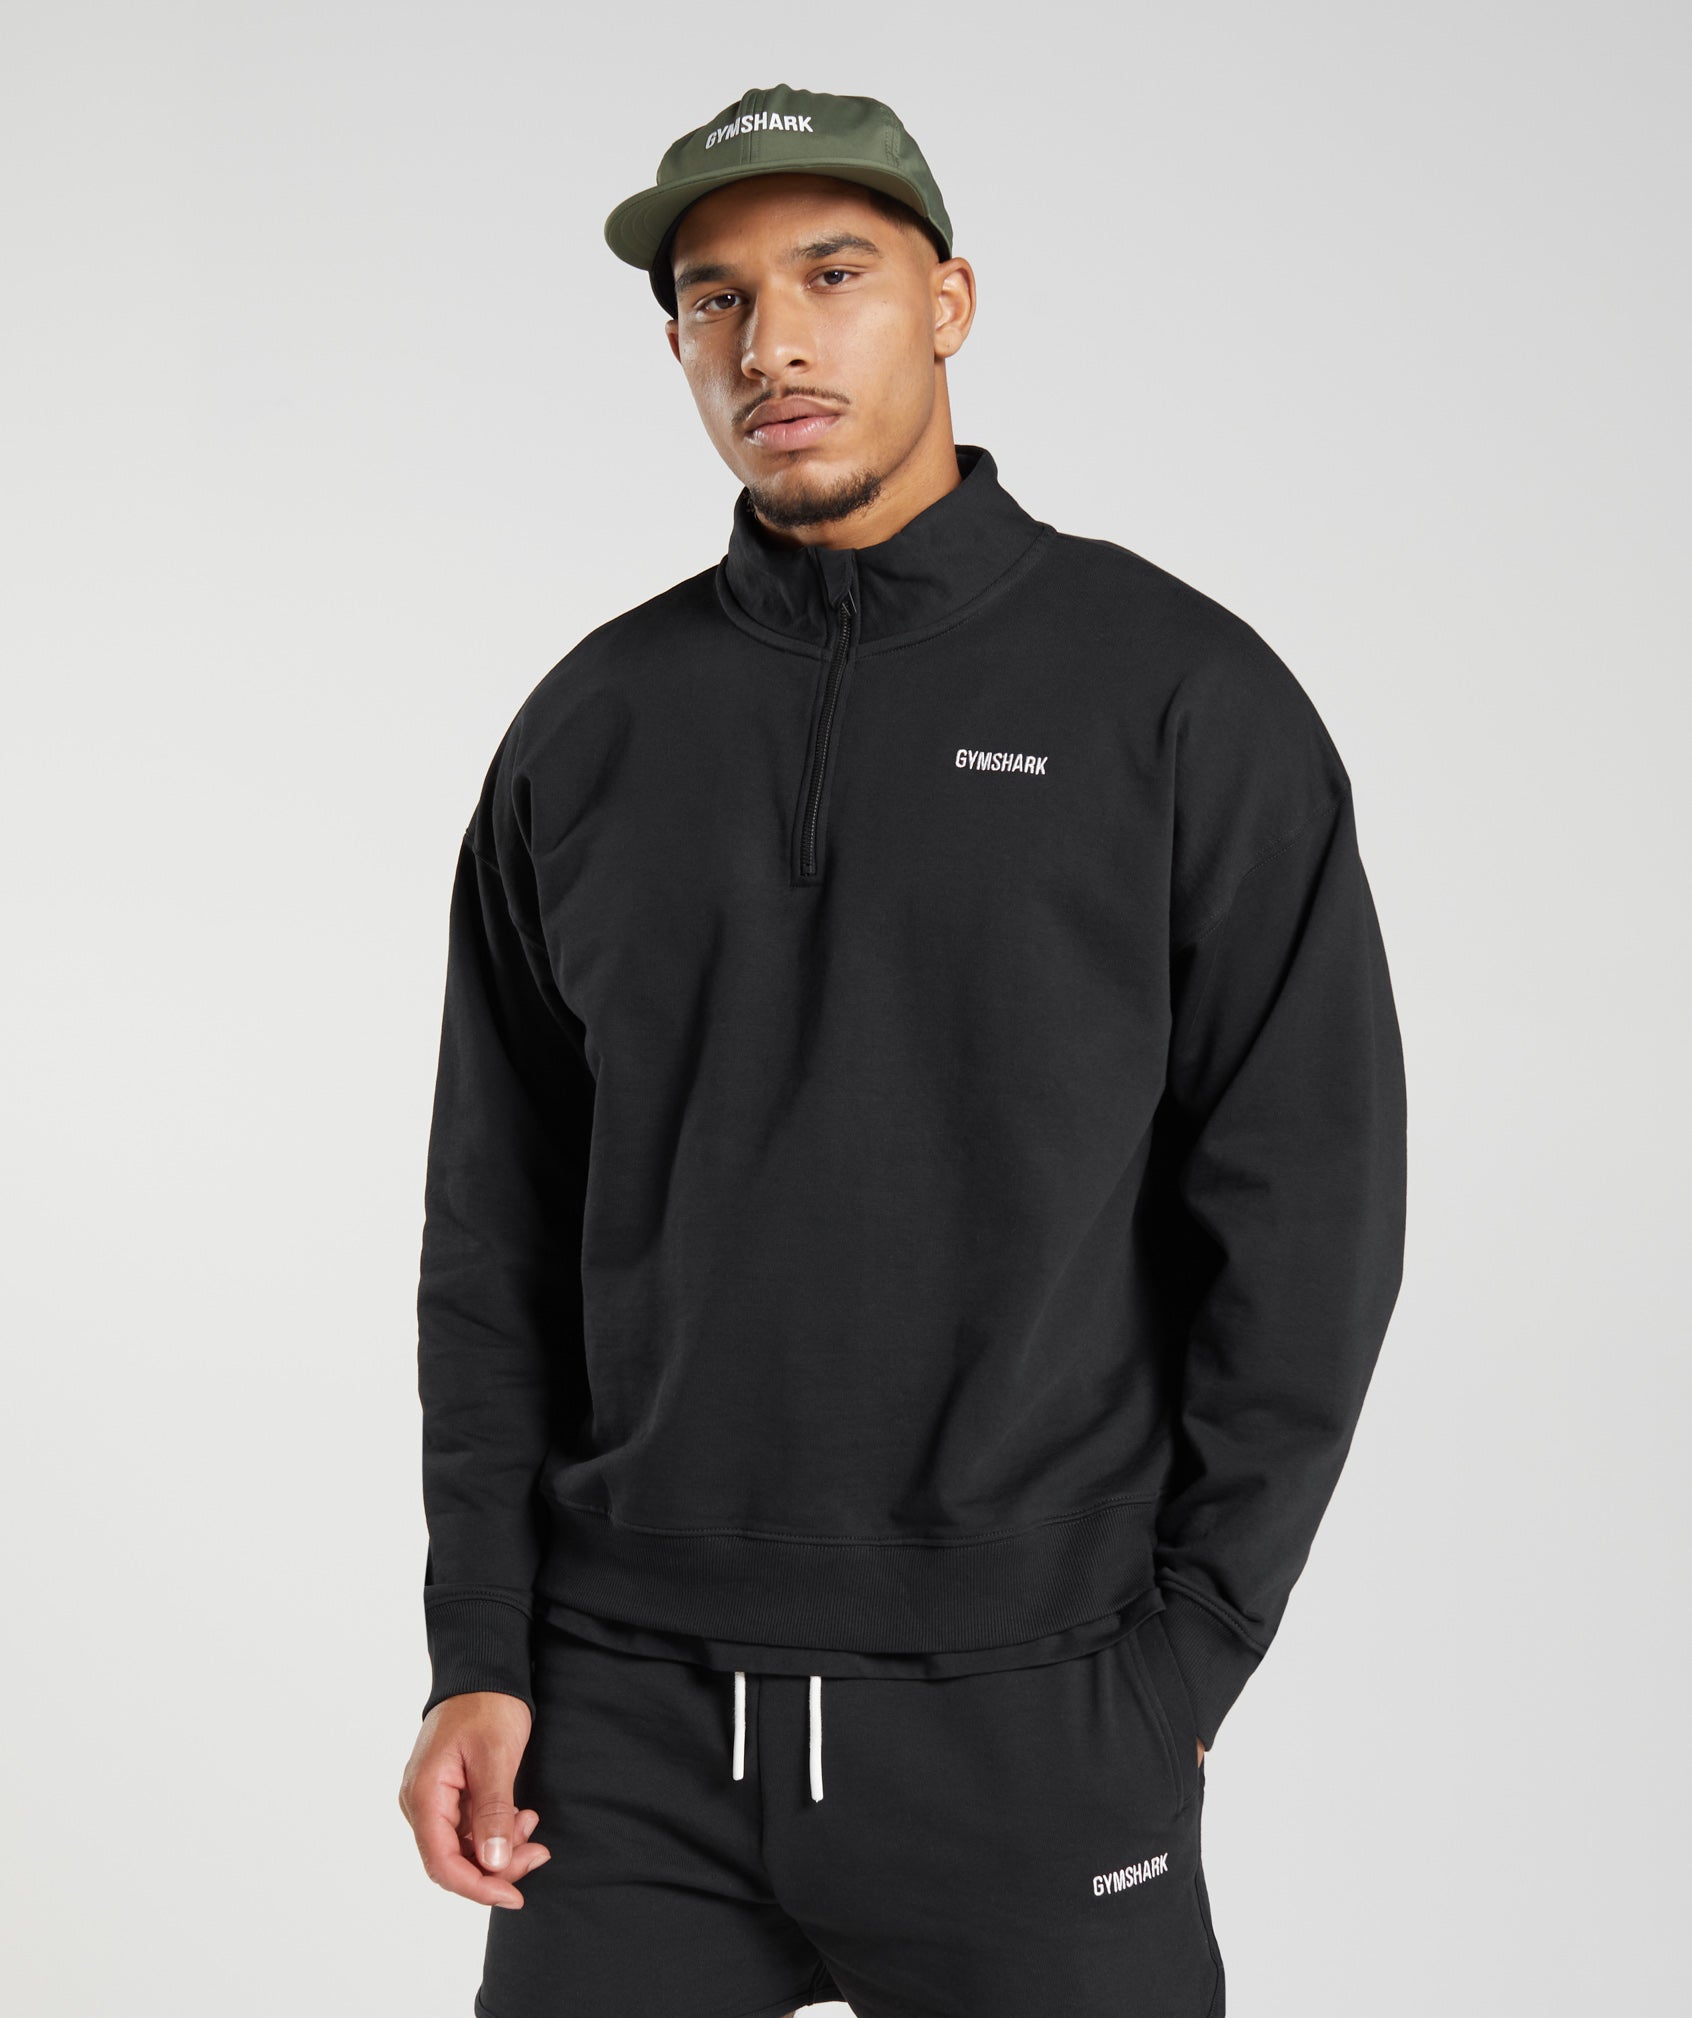 Rest Day Sweats 1/2 Zip Pullover